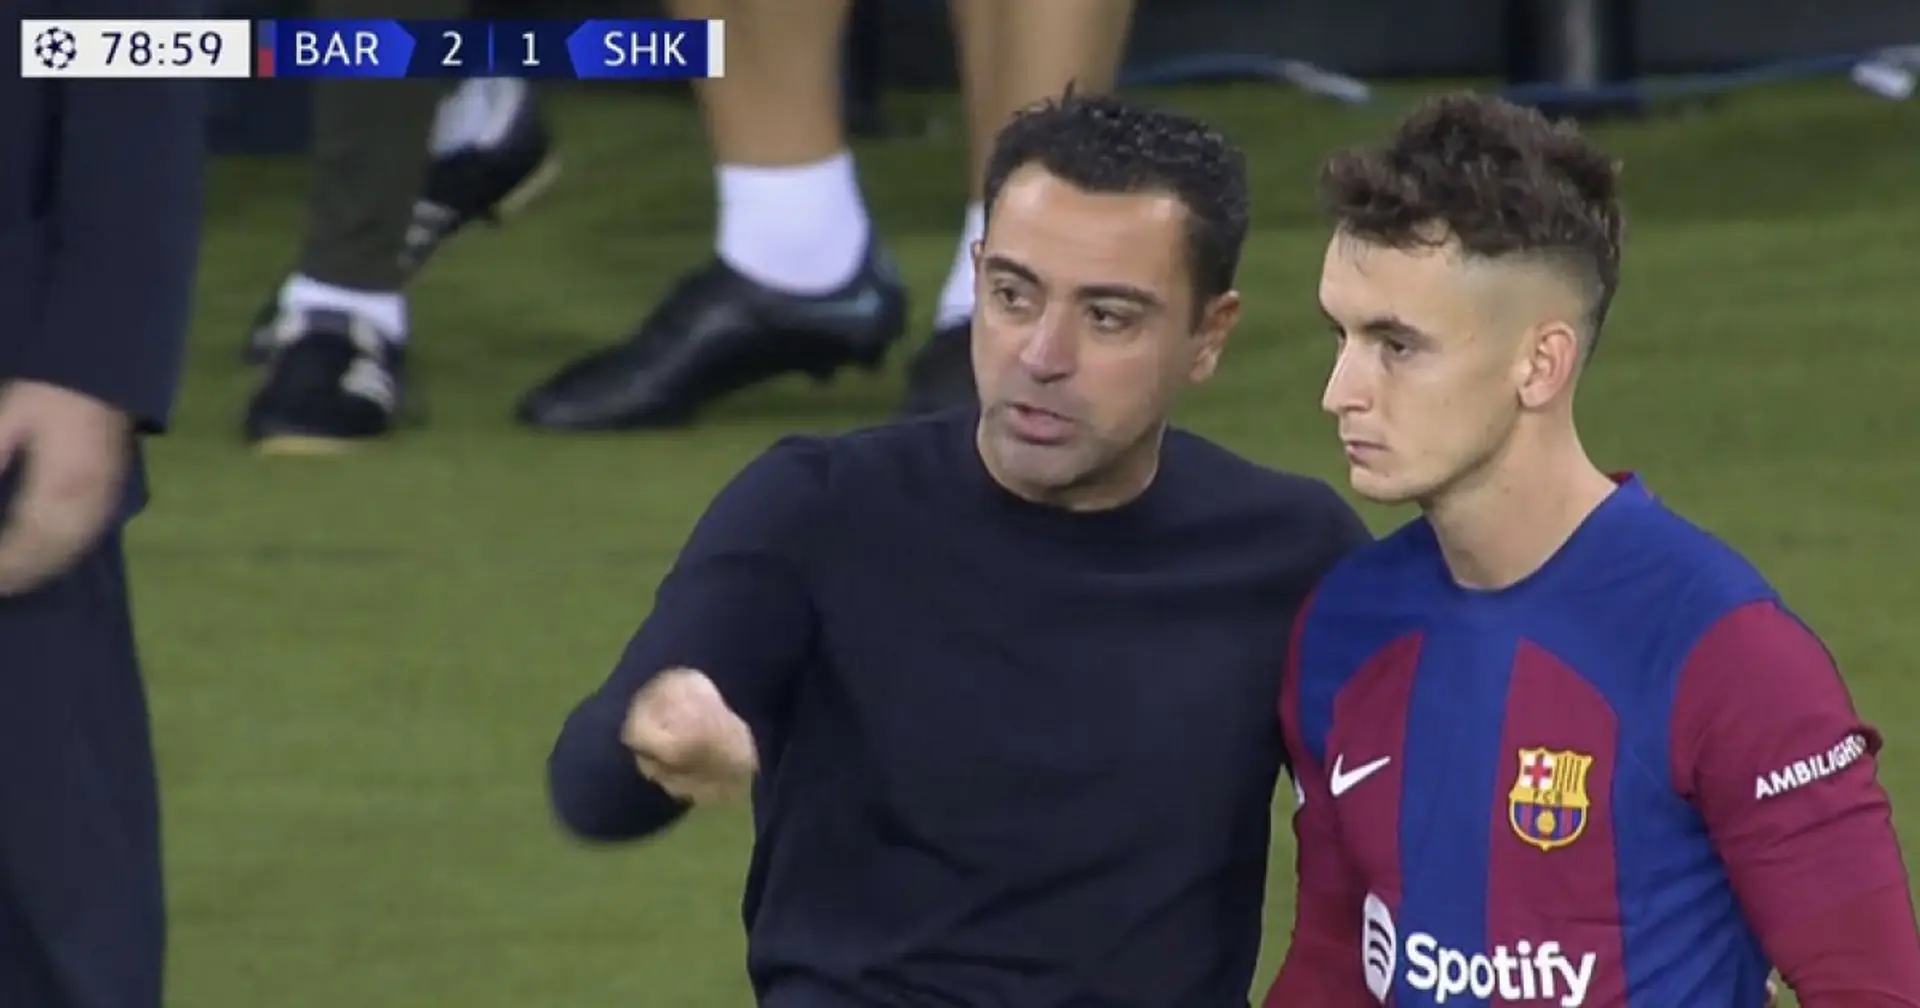 Who is this guy Xavi subbed on?